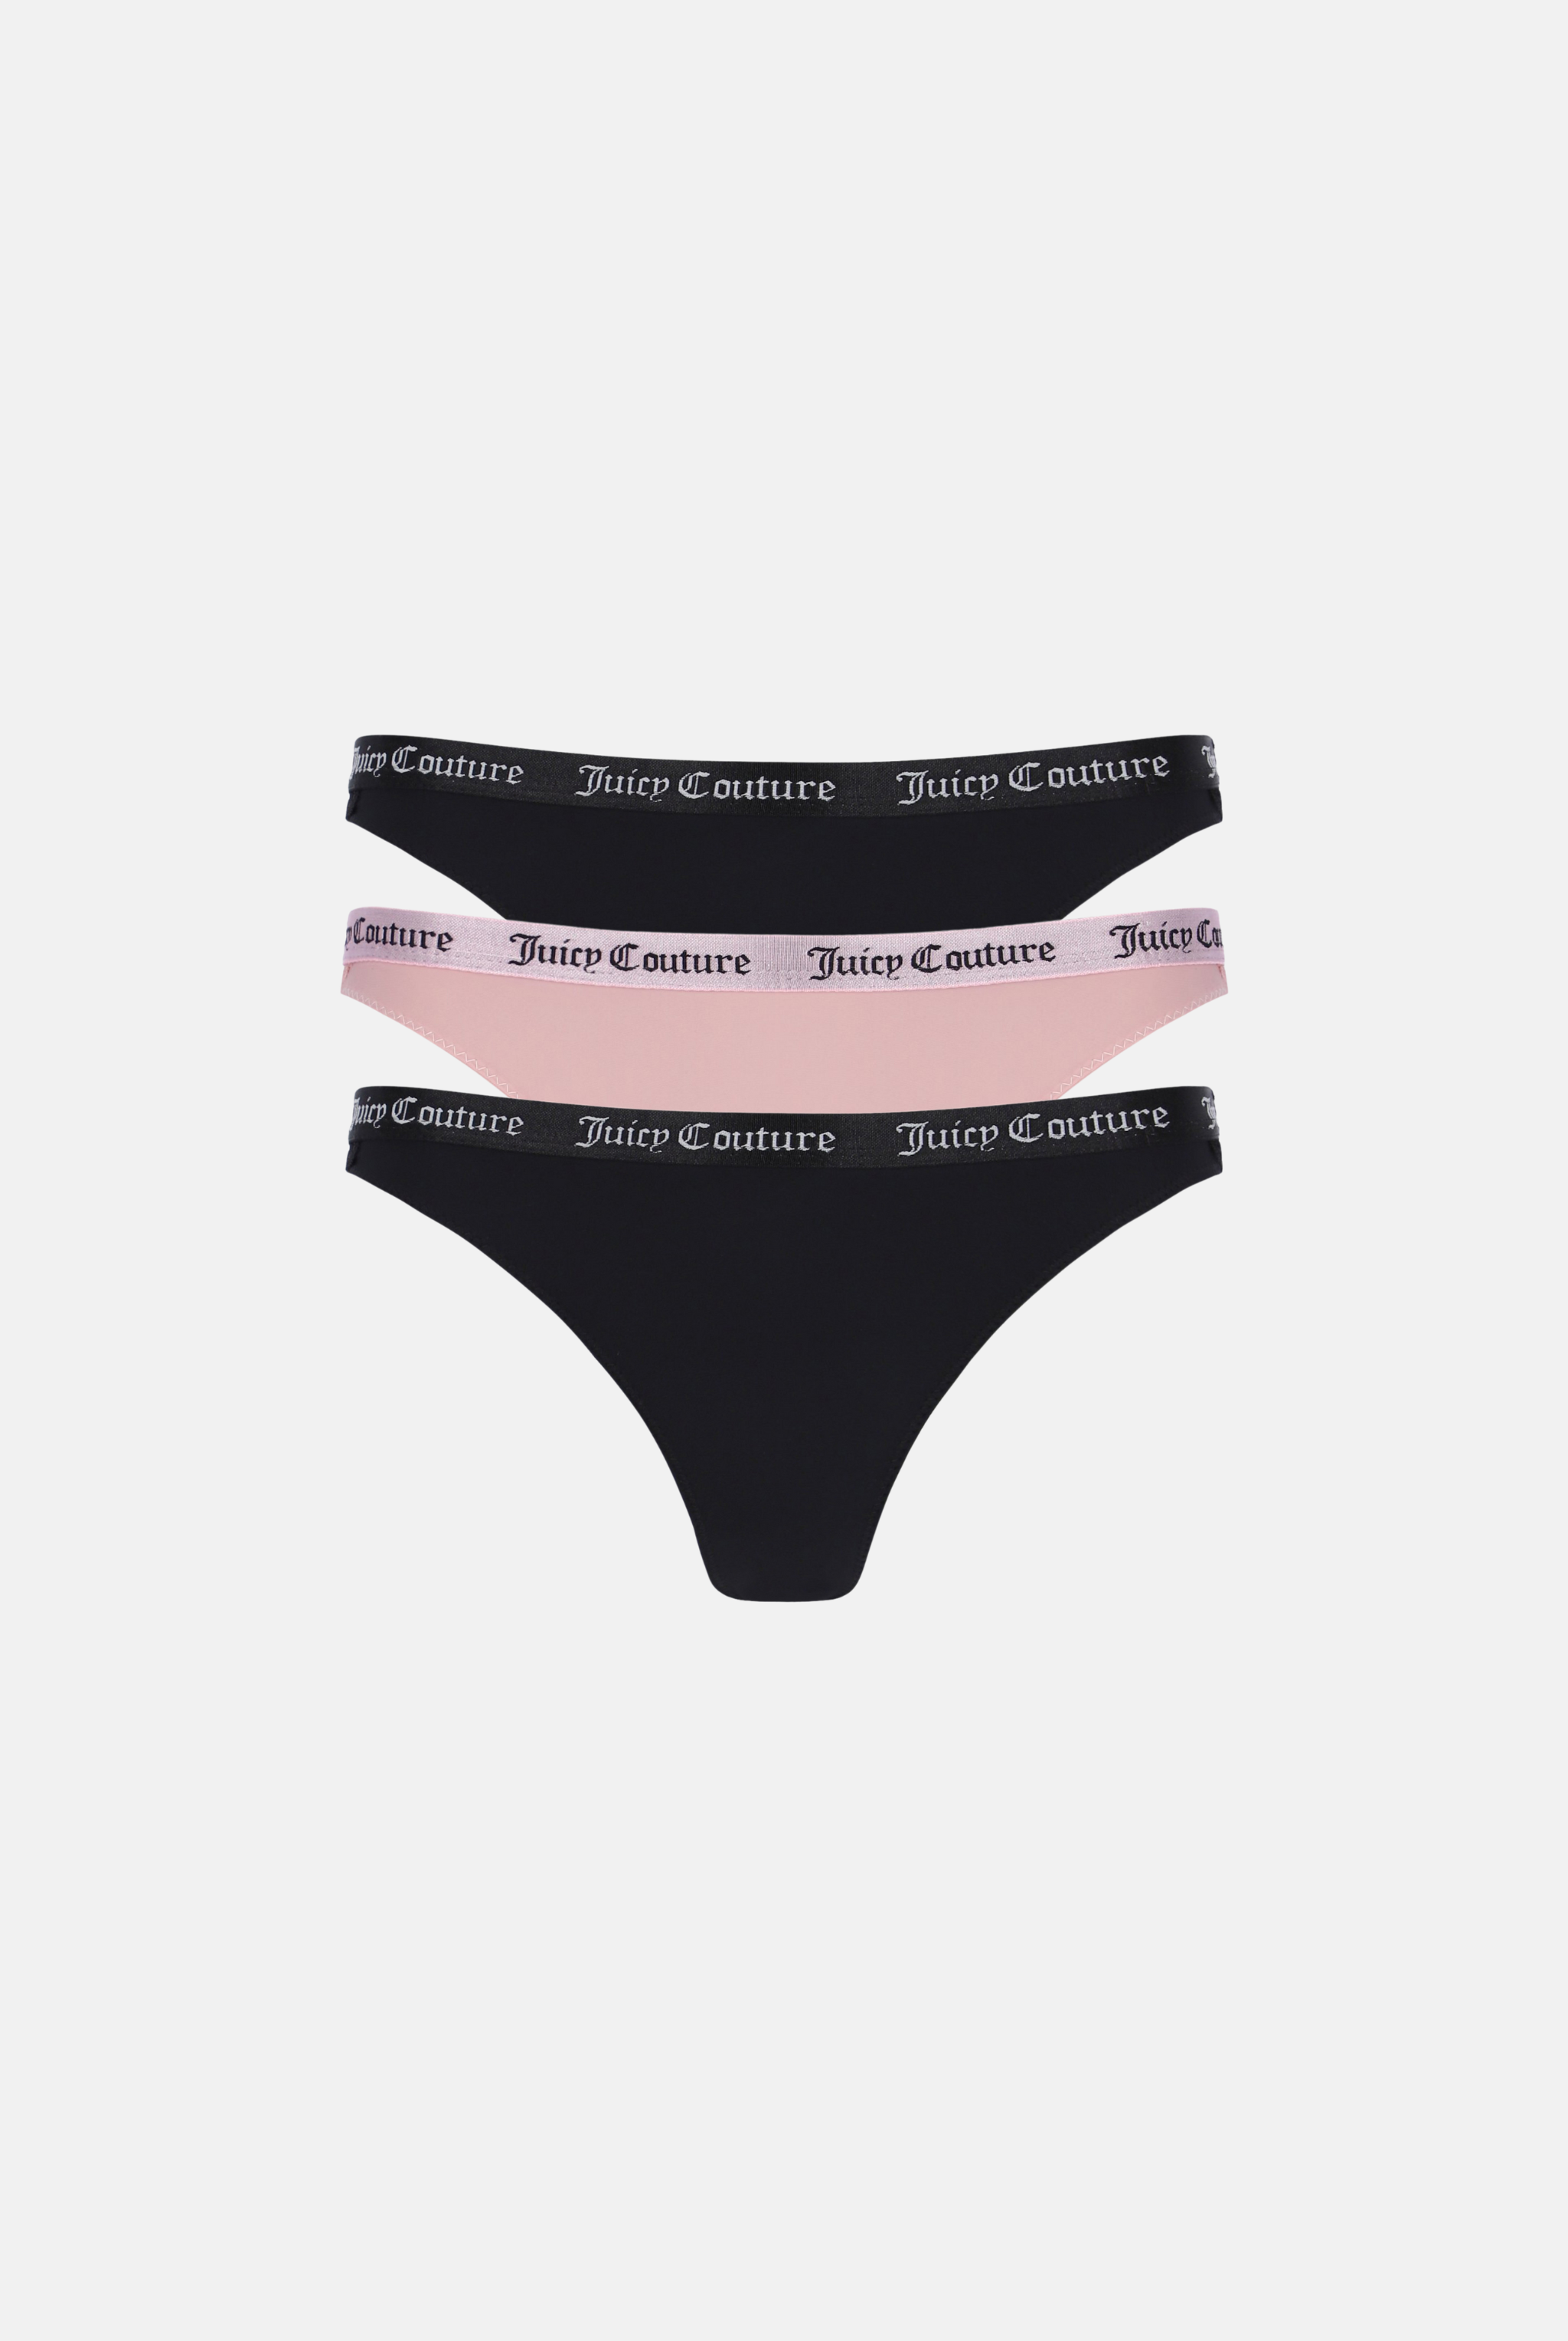 JUICY COUTURE INTIMATES 3 PACK CHEEKY BIKINI LACE PANTIES SMALL BRIGHT  COLORS 